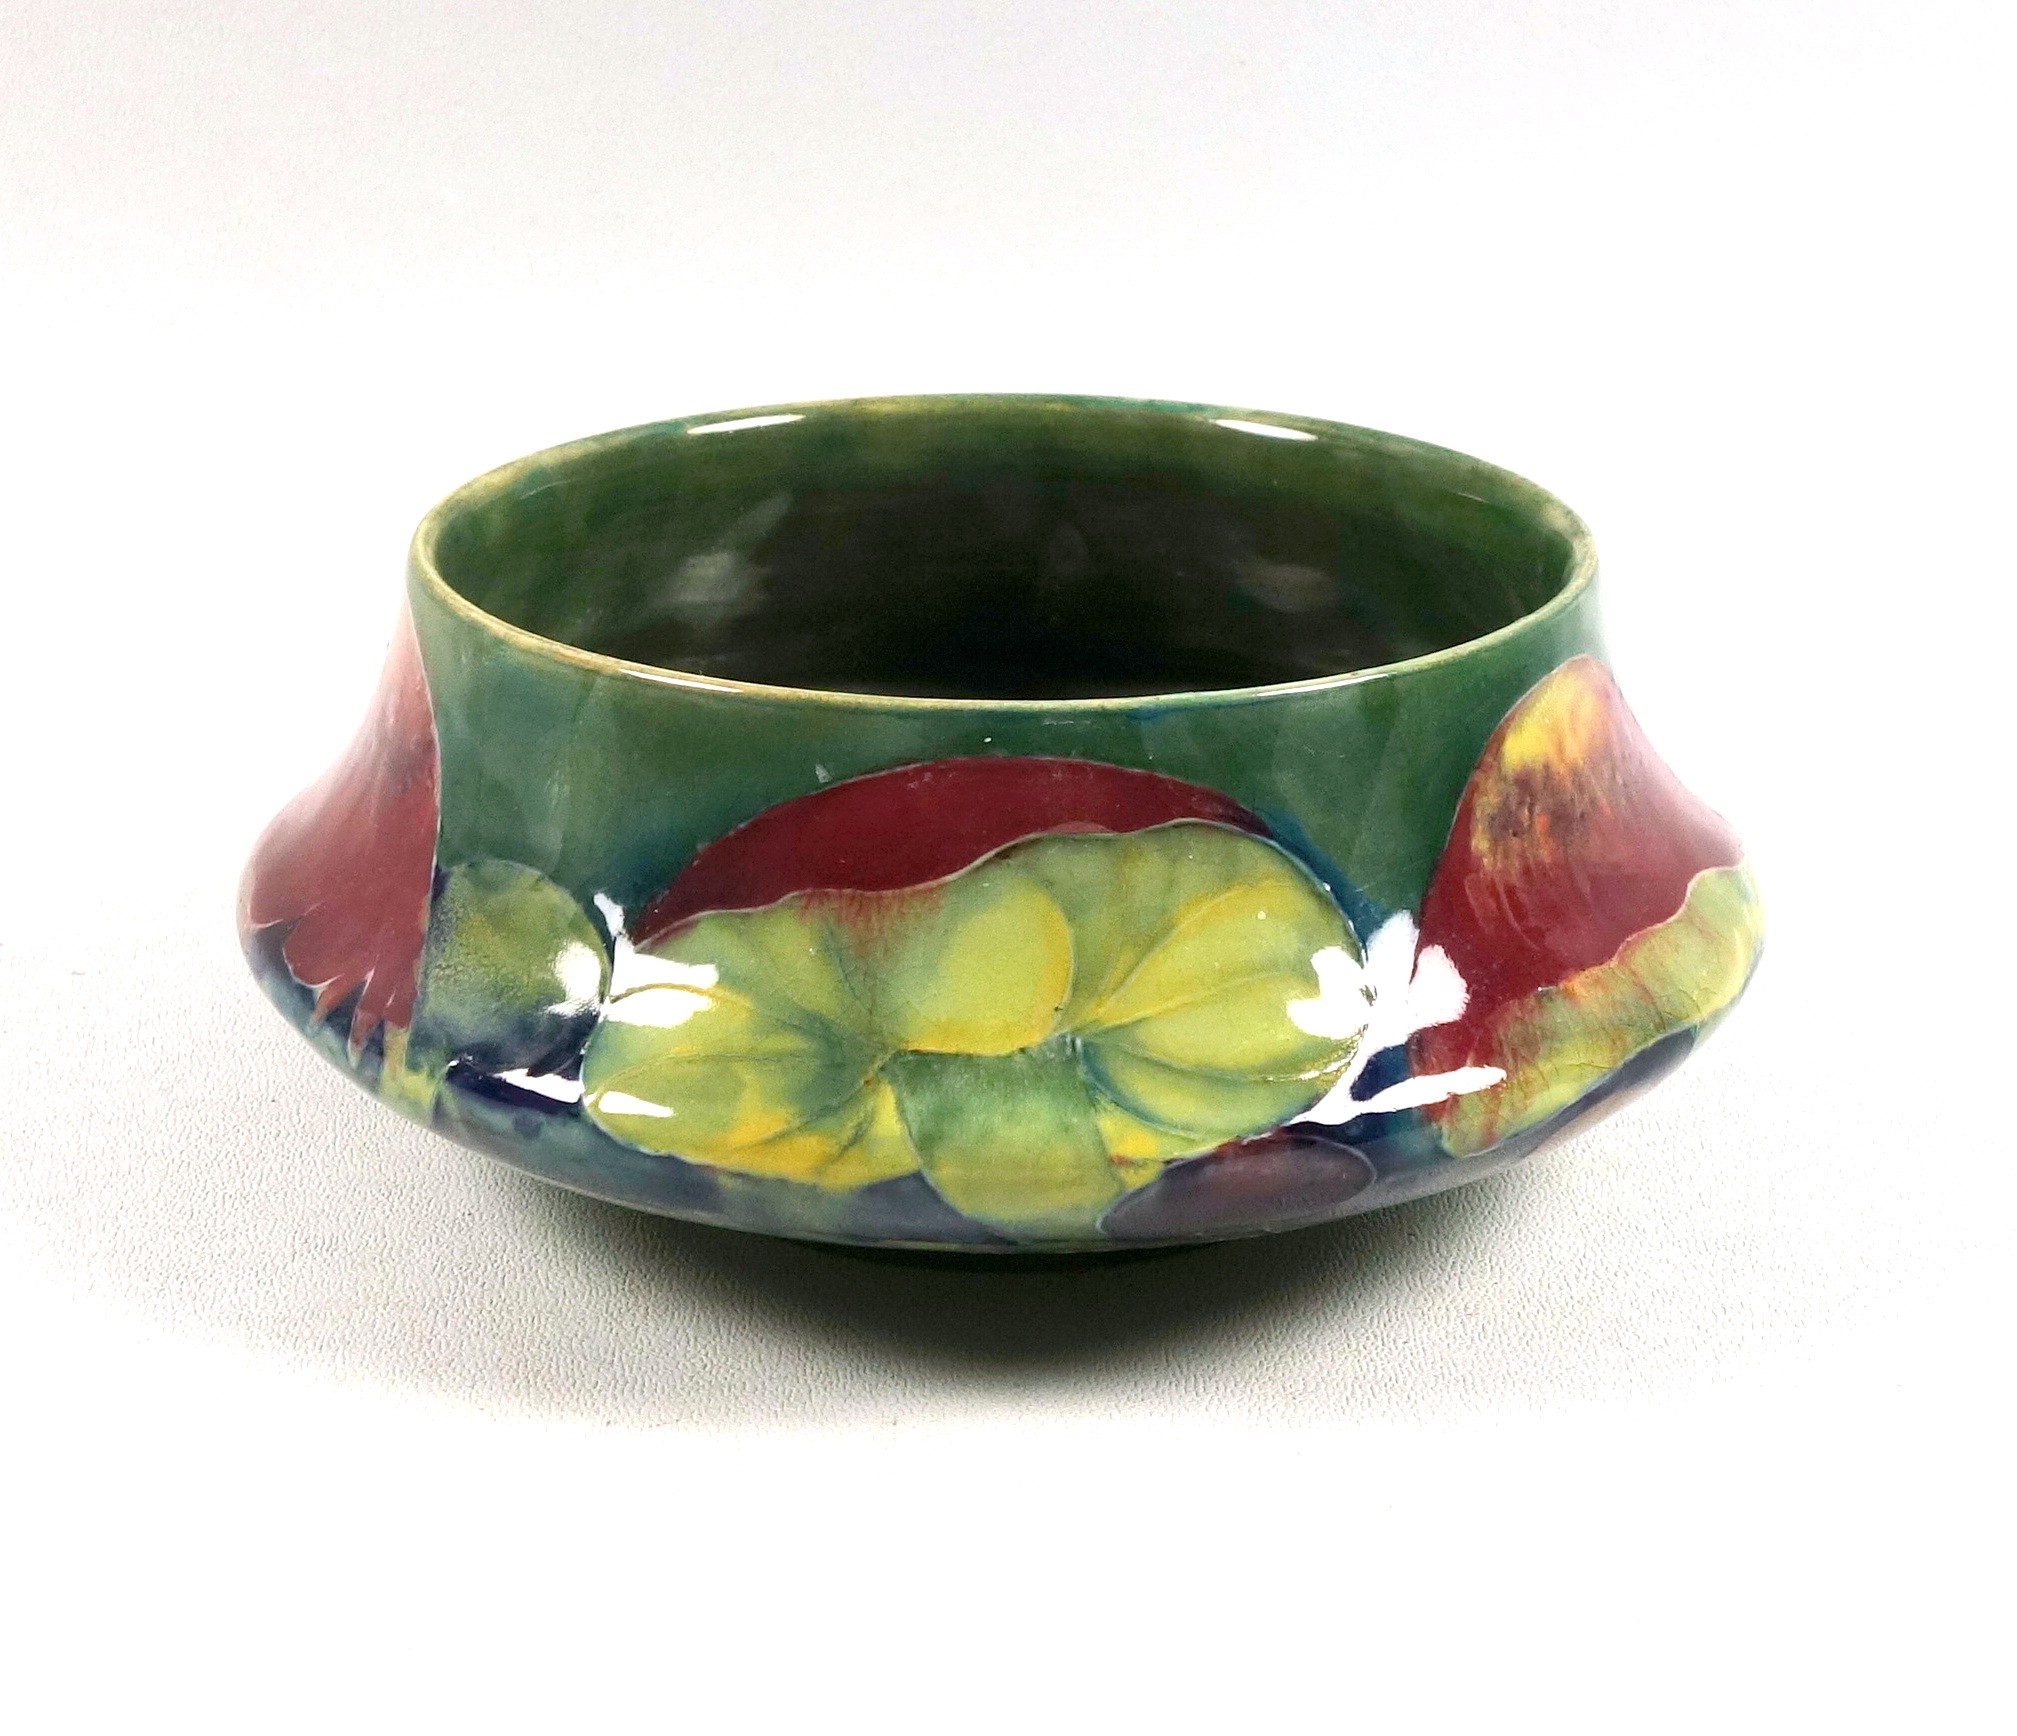 William Moorcroft "Claremont" pattern bowl, of footed squat shouldered form, decorated with